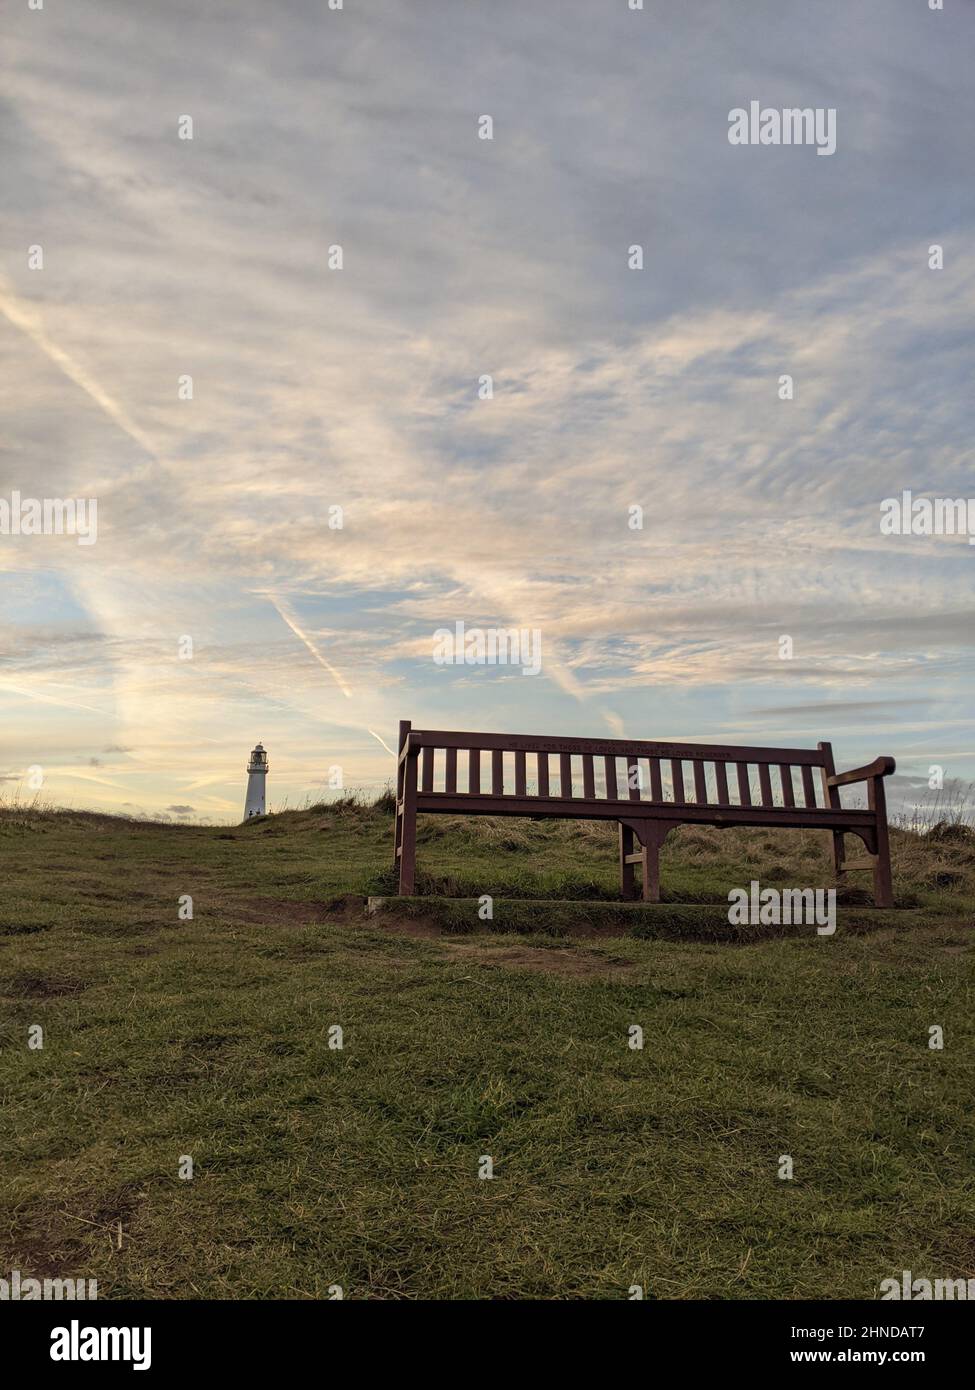 A wooden bench against a beautiful sunset sky Stock Photo